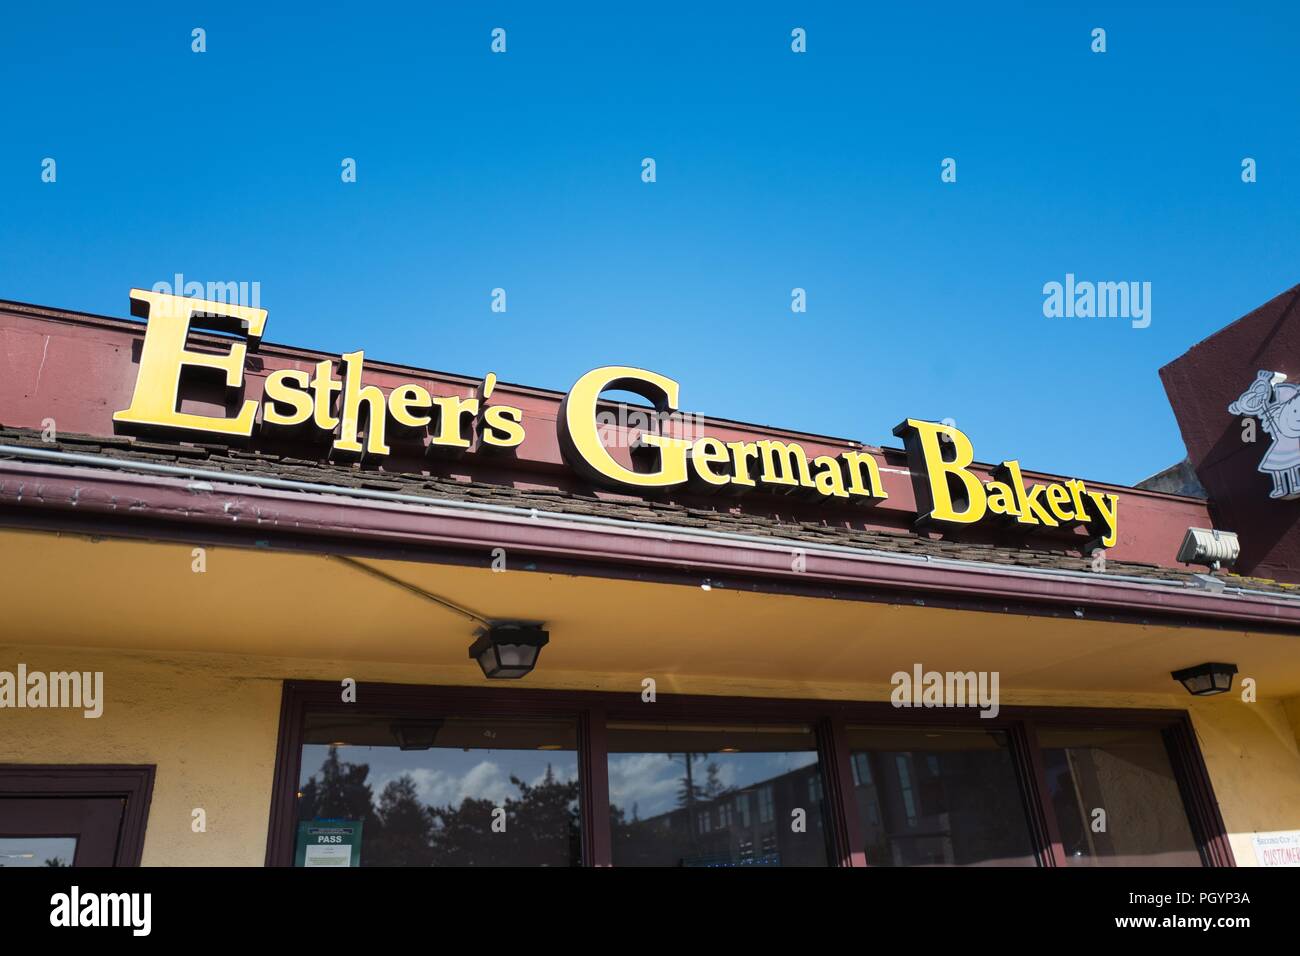 Sign on facade of Esther's German Bakery, a German cuisine restaurant and bakery which is popular among technology workers and is known for being a favorite of Facebook founder Mark Zuckerberg, in the Silicon Valley, Los Altos, California, May 30, 2018. () Stock Photo